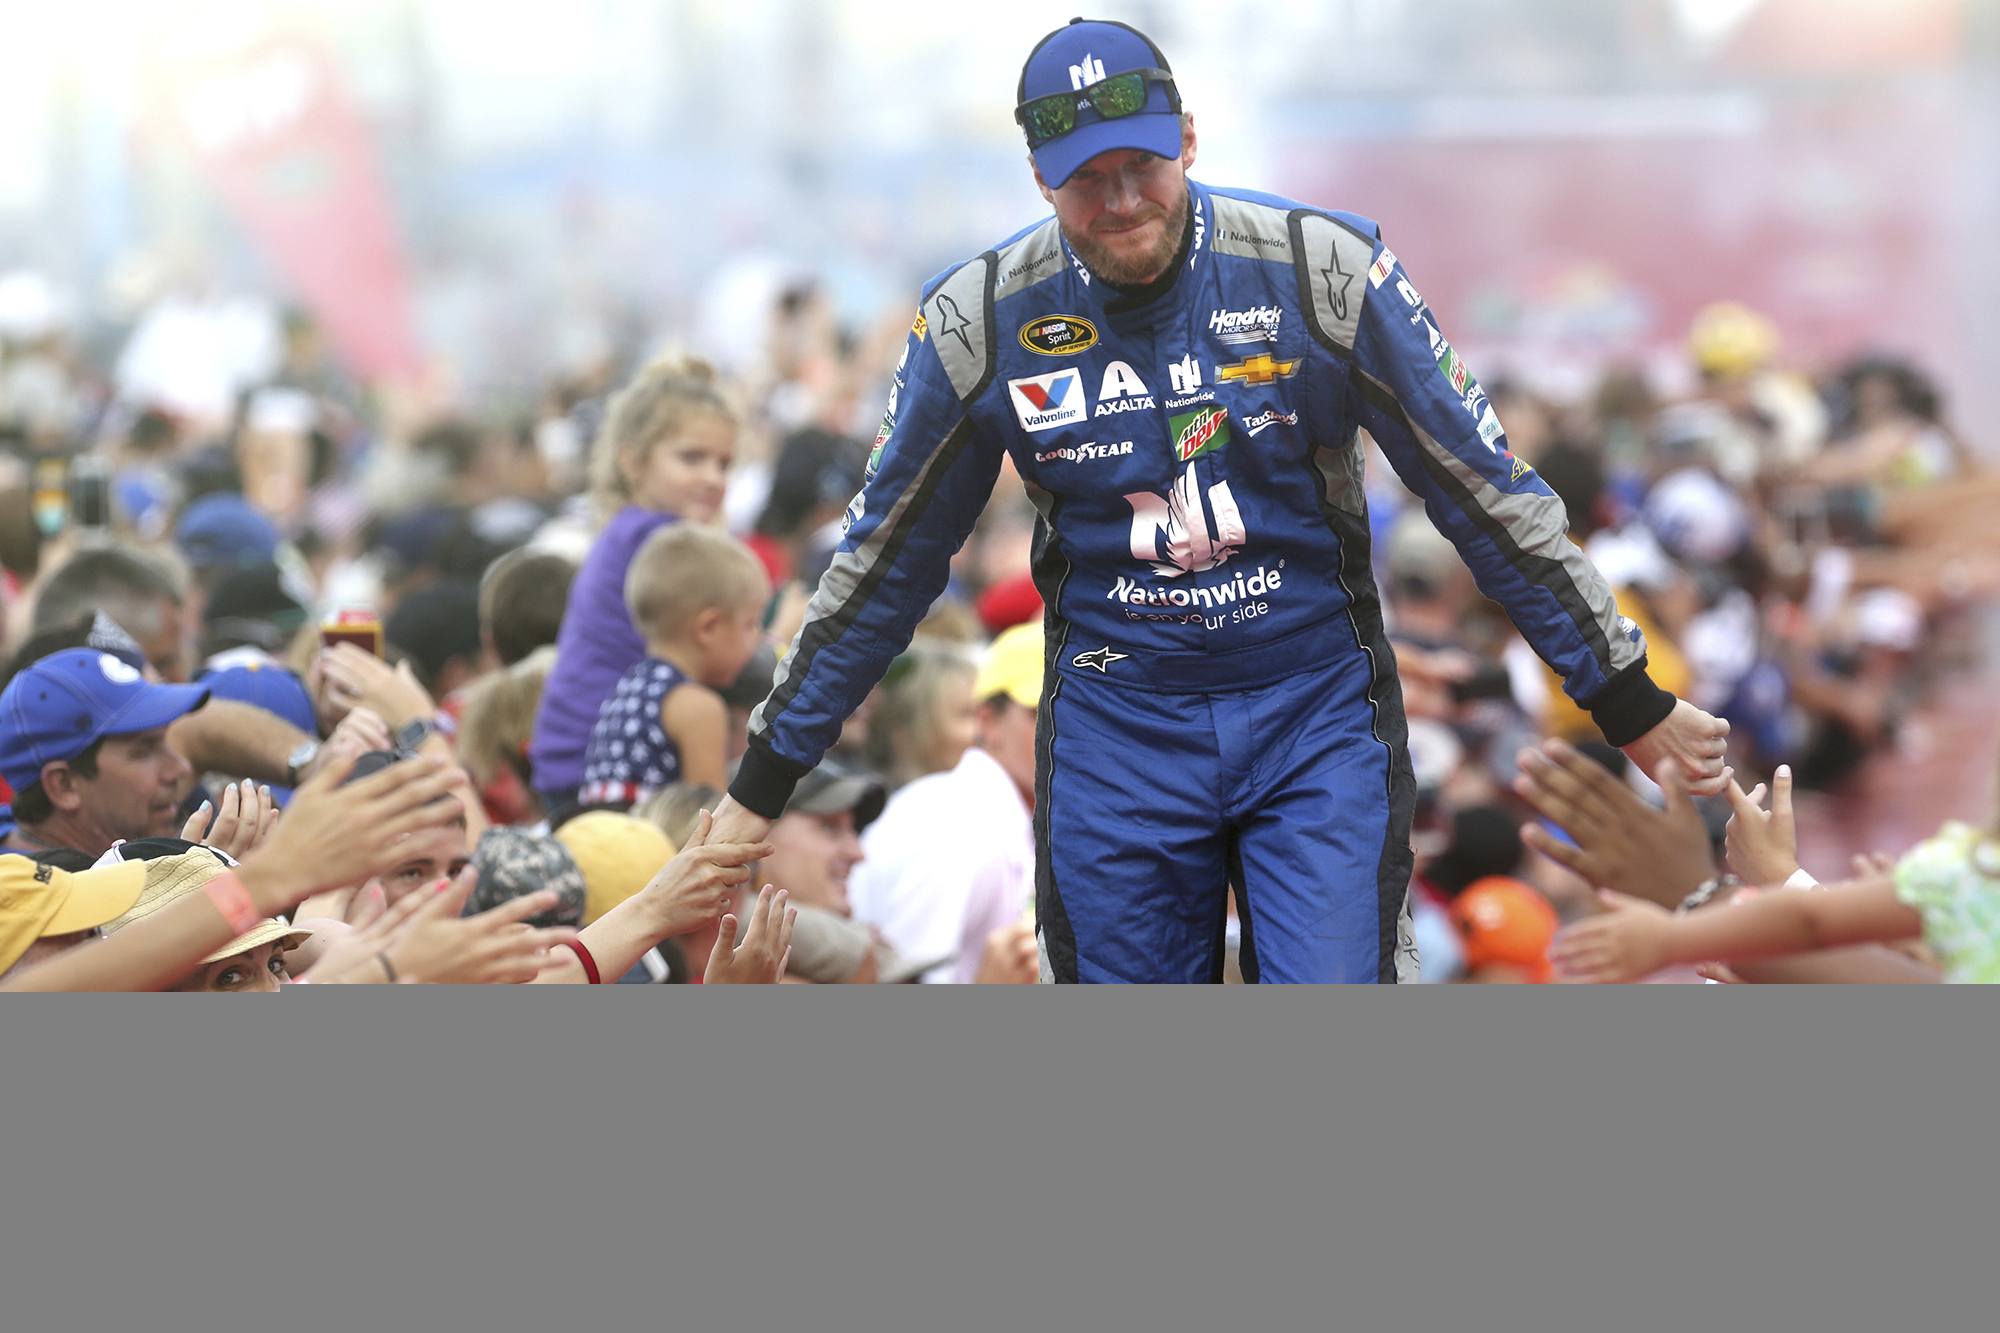 Dale Earnhardt Jr. to miss rest of NASCAR season because it’s ‘the right thing’